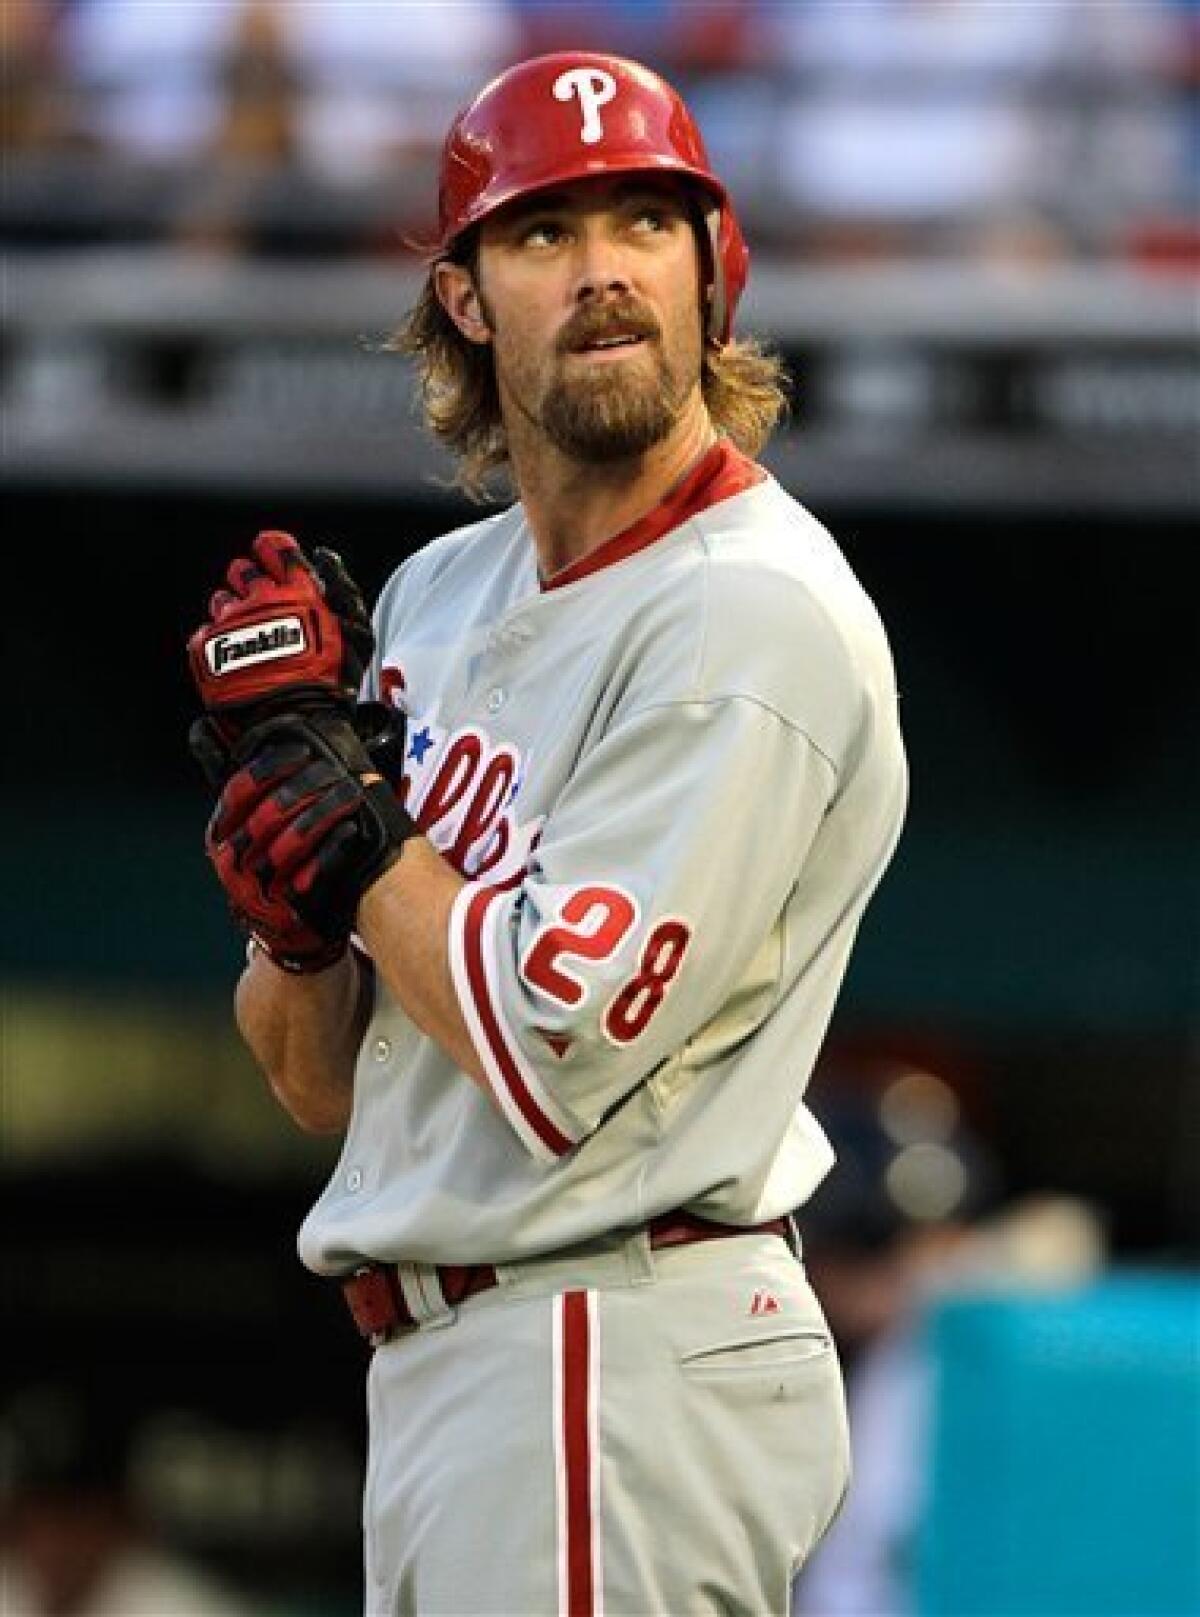 Winter meetings open with big deal _ Werth to Nats - The San Diego